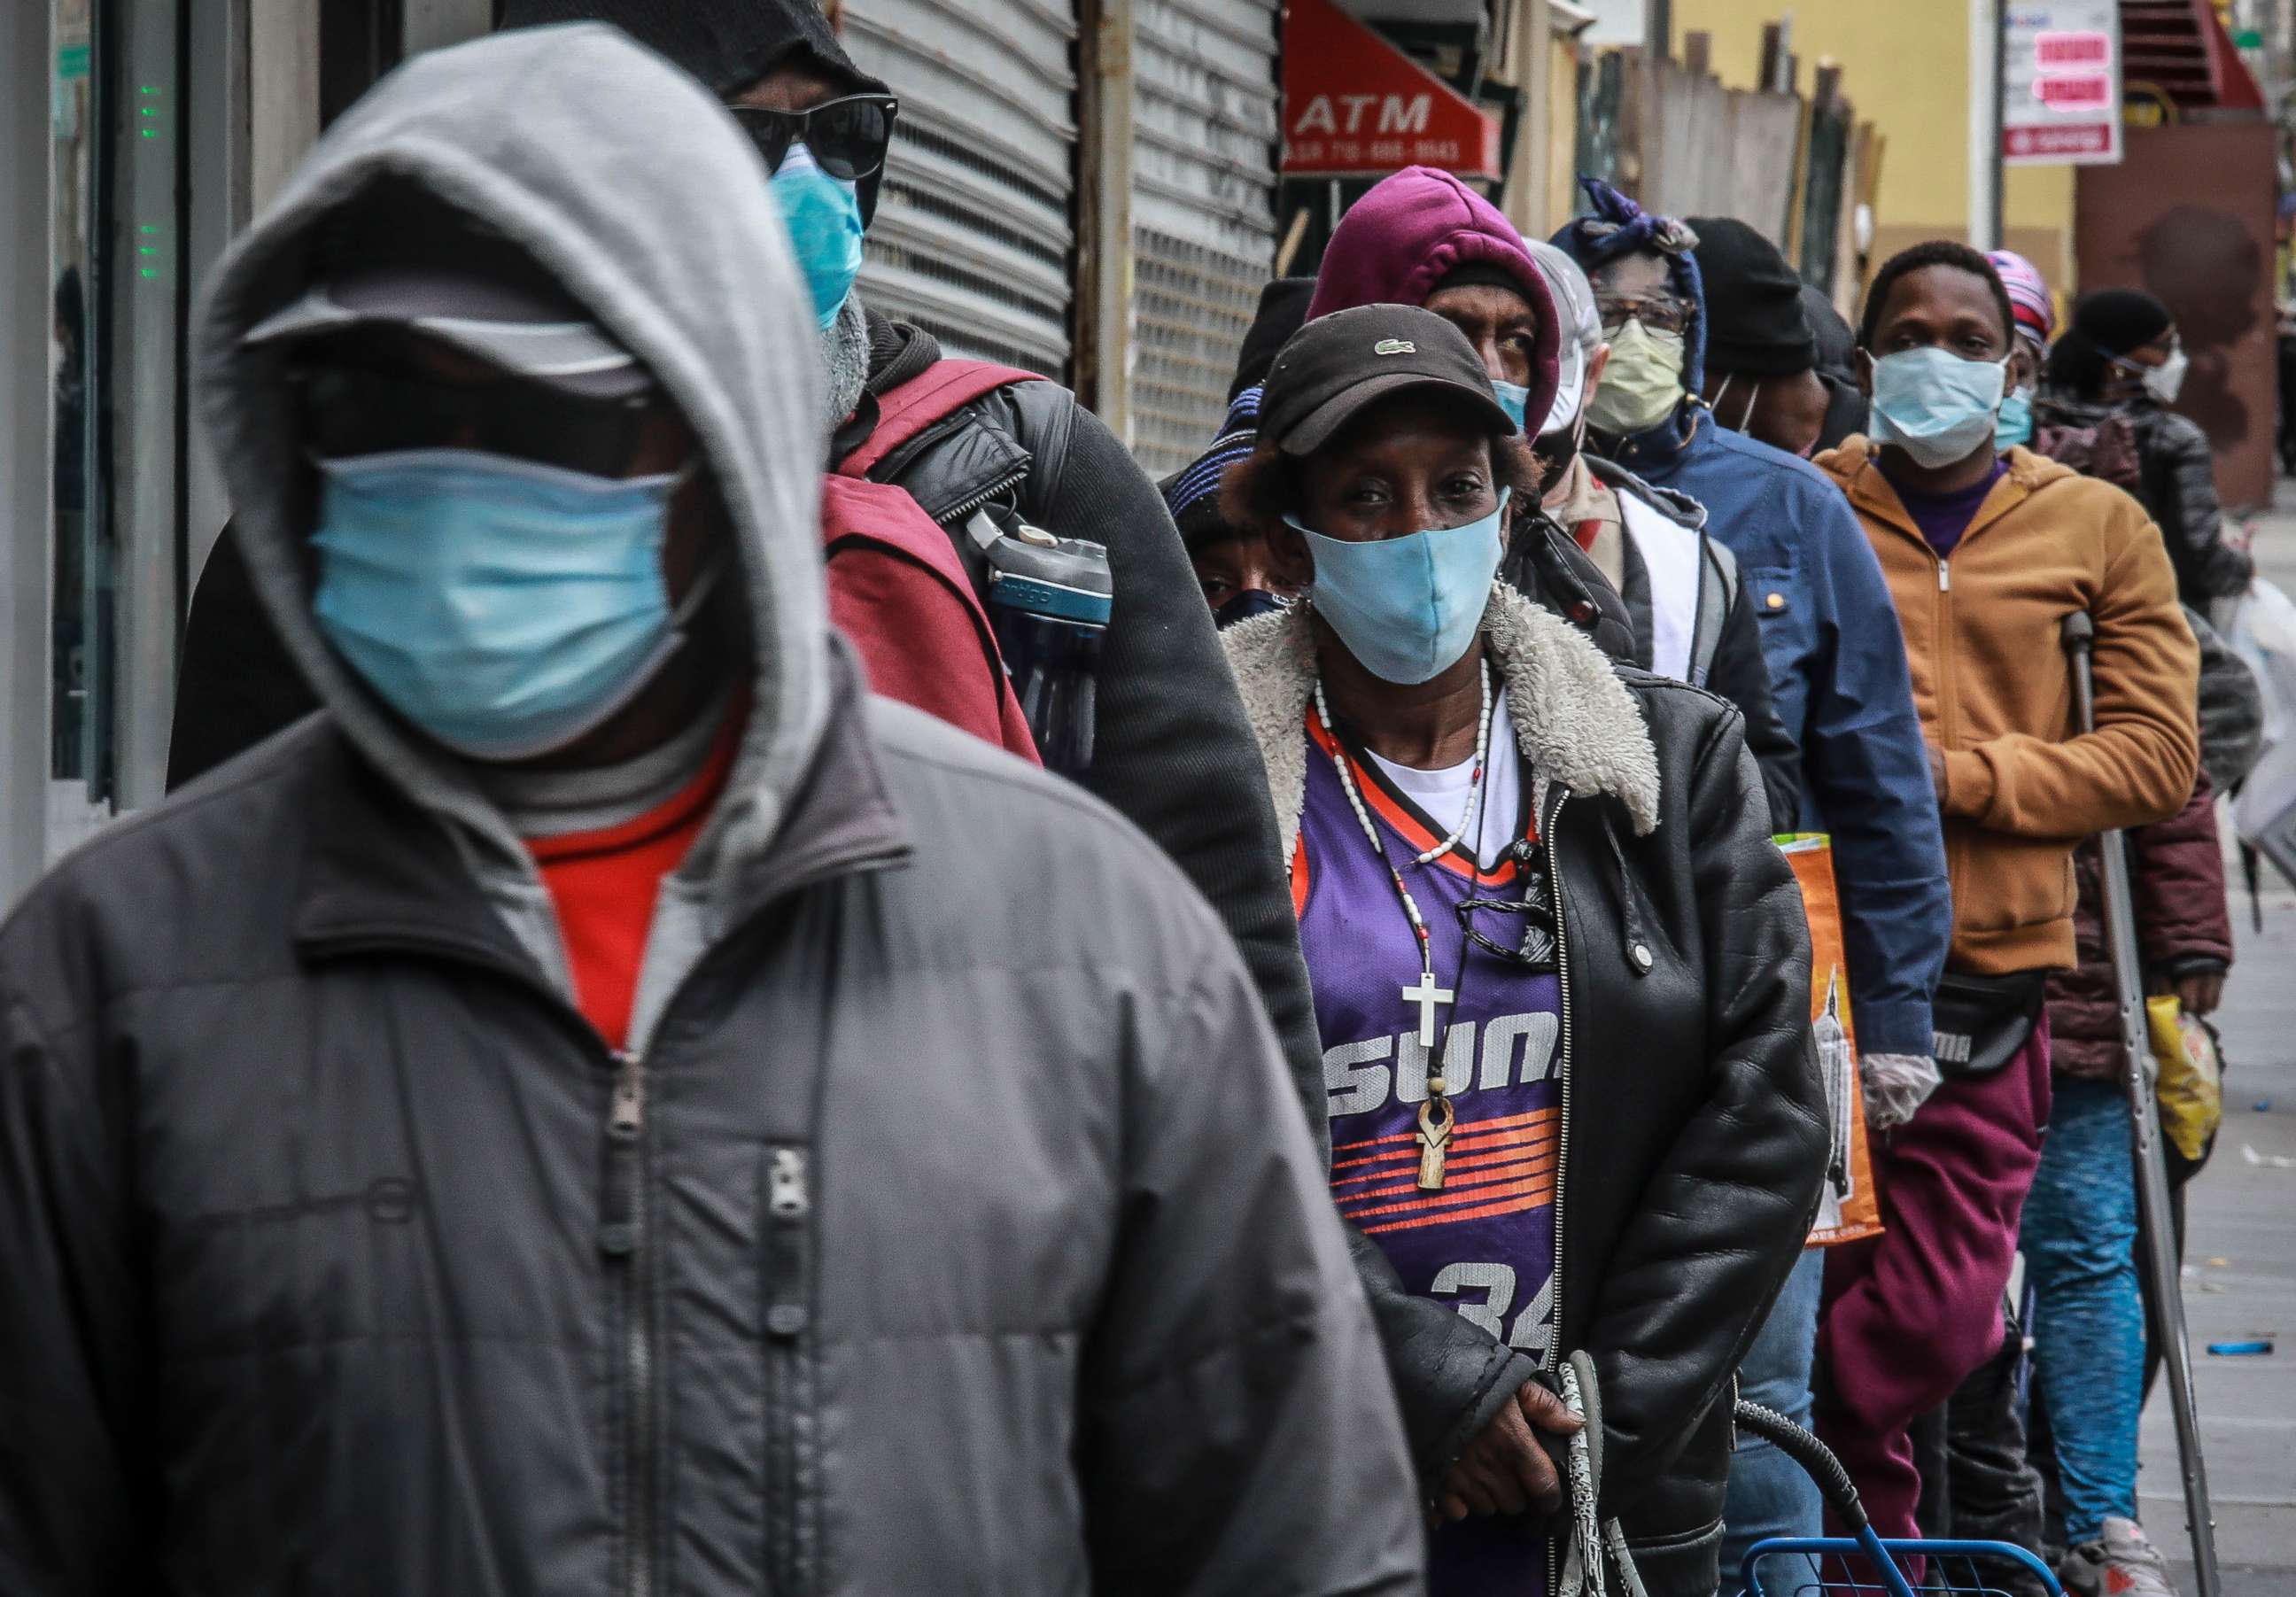 PHOTO: In this April 18, 2020, file photo, people wait for a distribution of masks and food from the Rev. Al Sharpton in the Harlem neighborhood of New York.